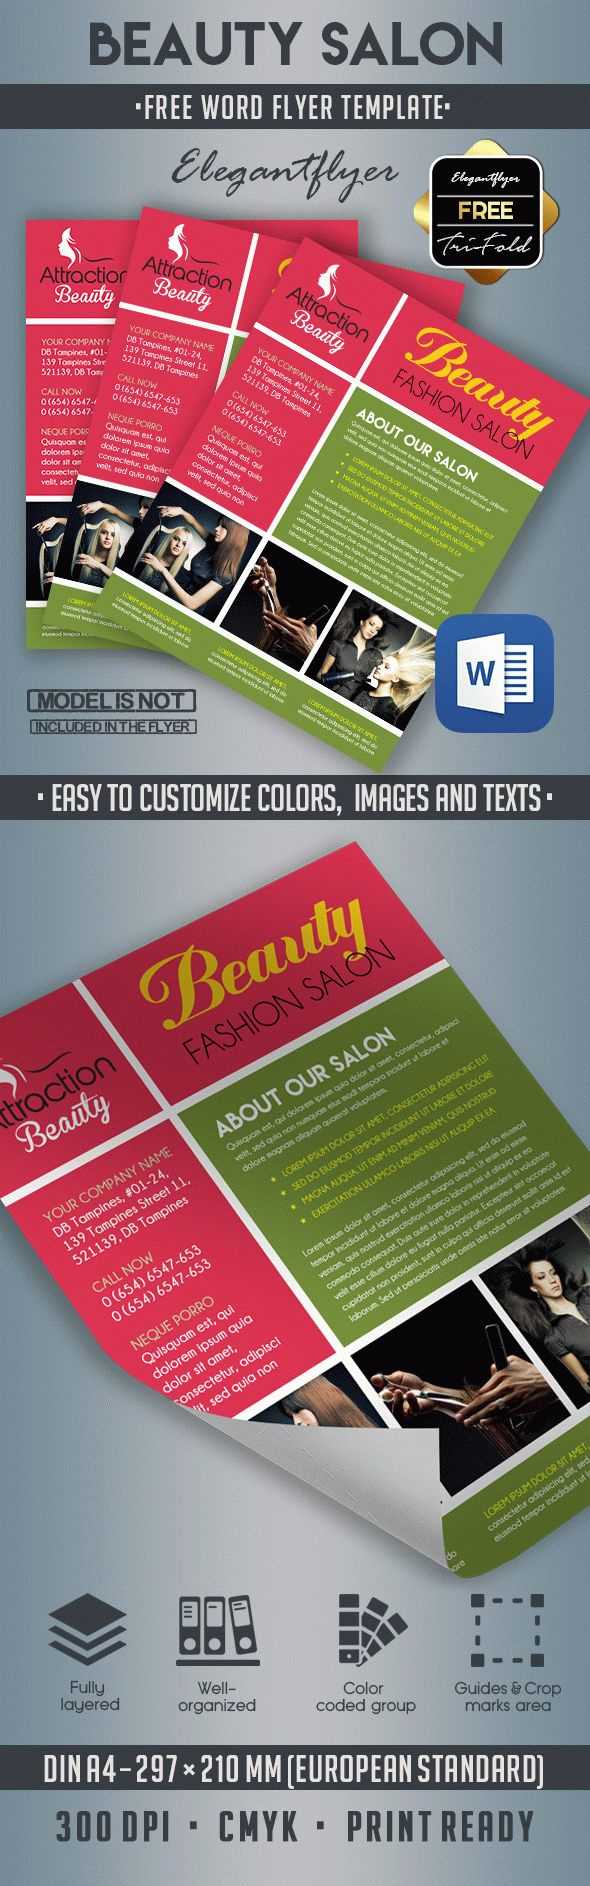 10 Best Business Flyer Templates In Word! |Elegantflyer Inside Free Business Flyer Templates For Microsoft Word